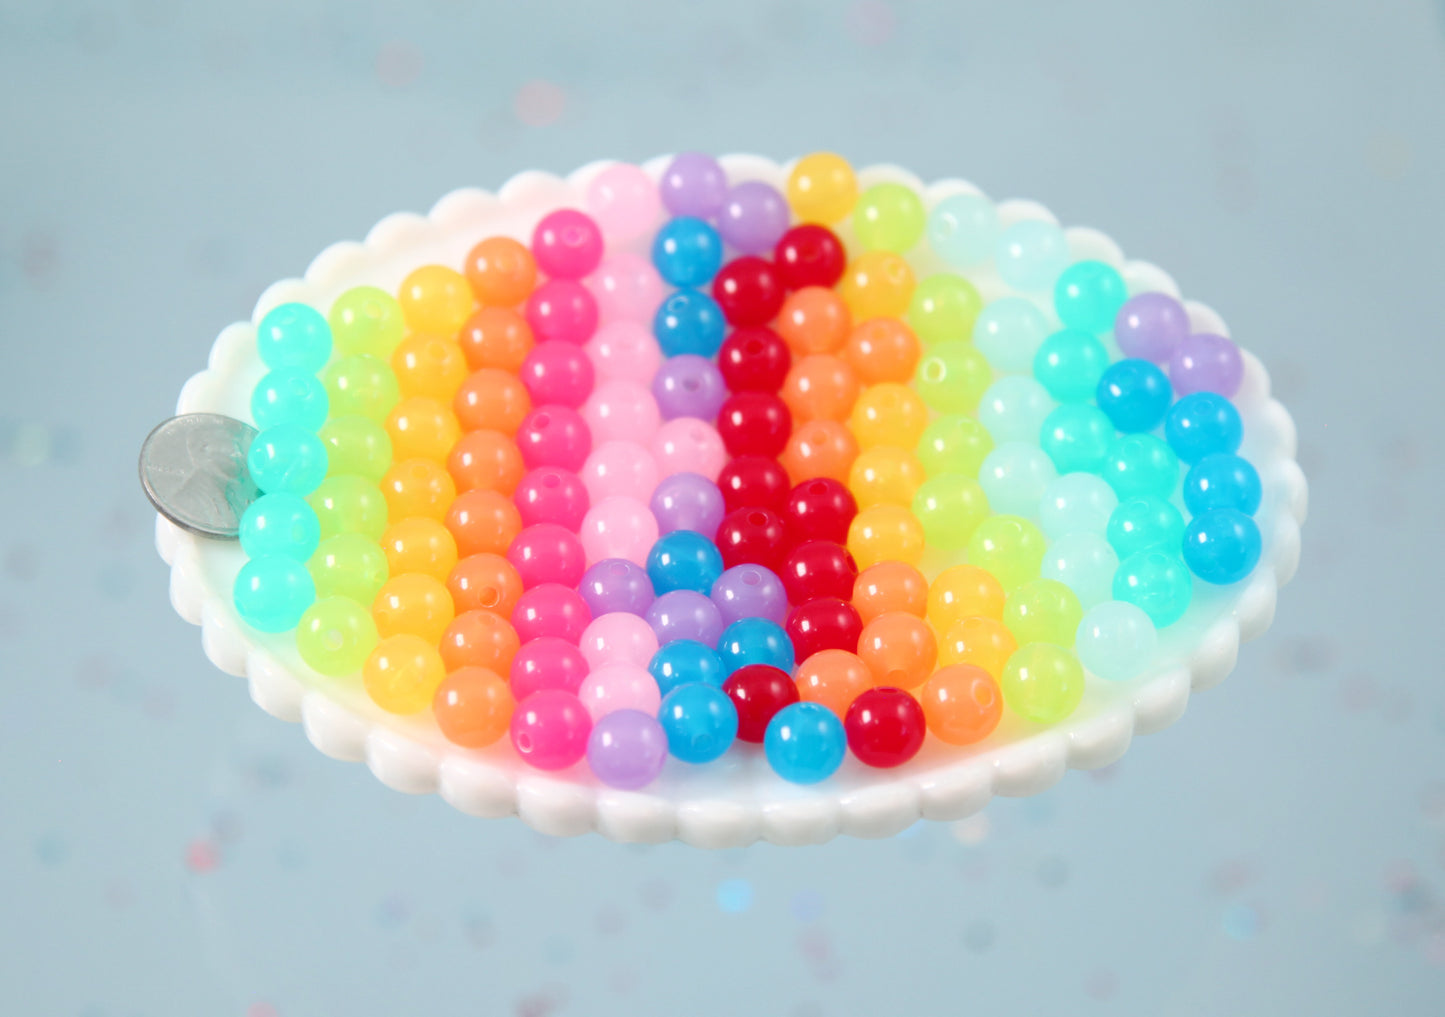 Acrylic Jelly Beads - 10mm Vibrant Jelly Color Acrylic Beads Translucent Resin or Acrylic Beads - 80 pc set